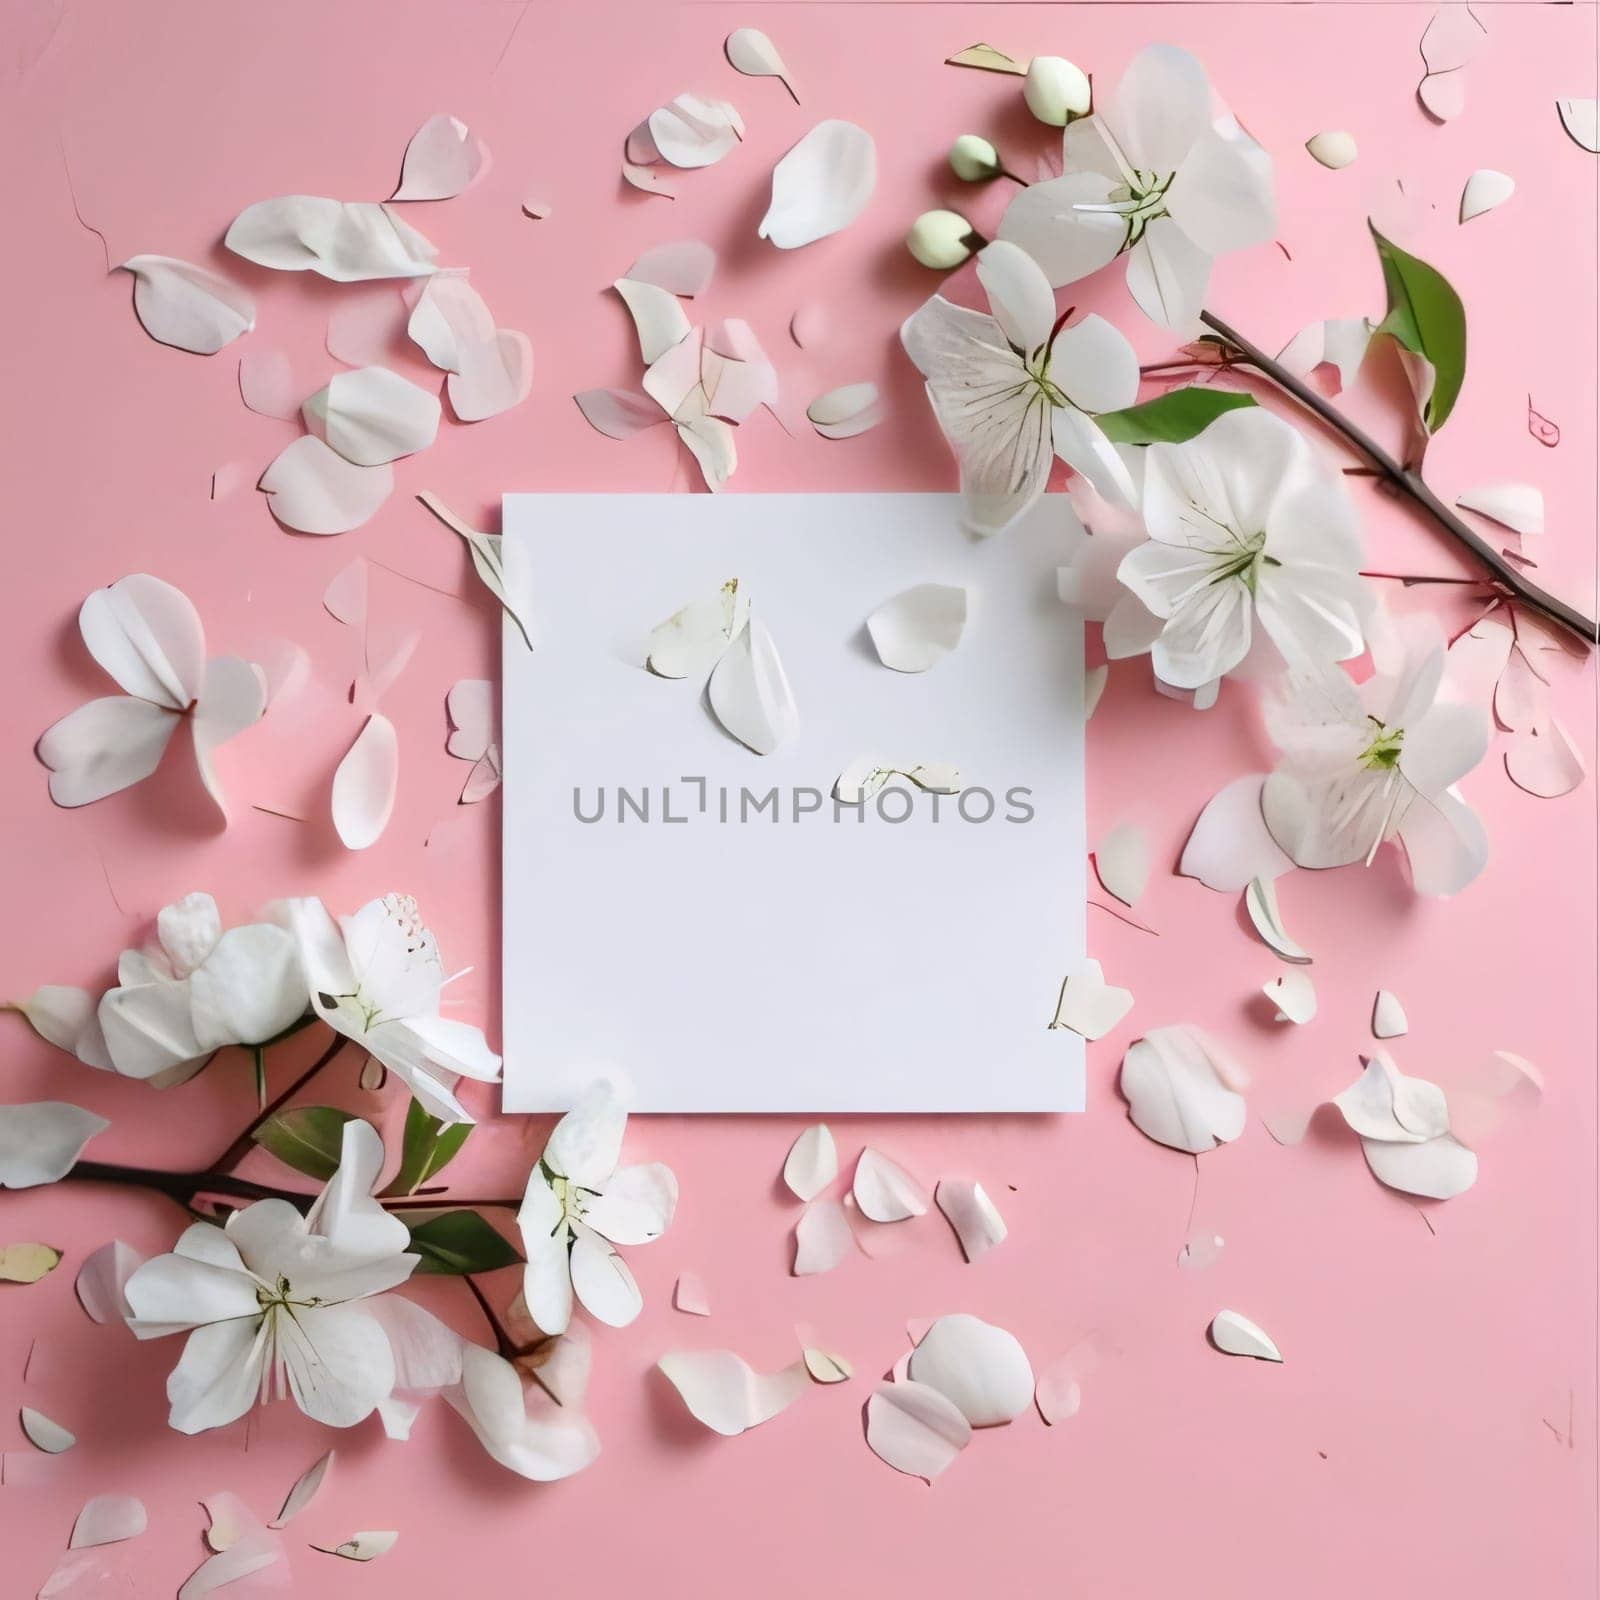 White blank card on a pink background around scattered white flower petals. Places on their own content. Flowering flowers, a symbol of spring, new life. by ThemesS